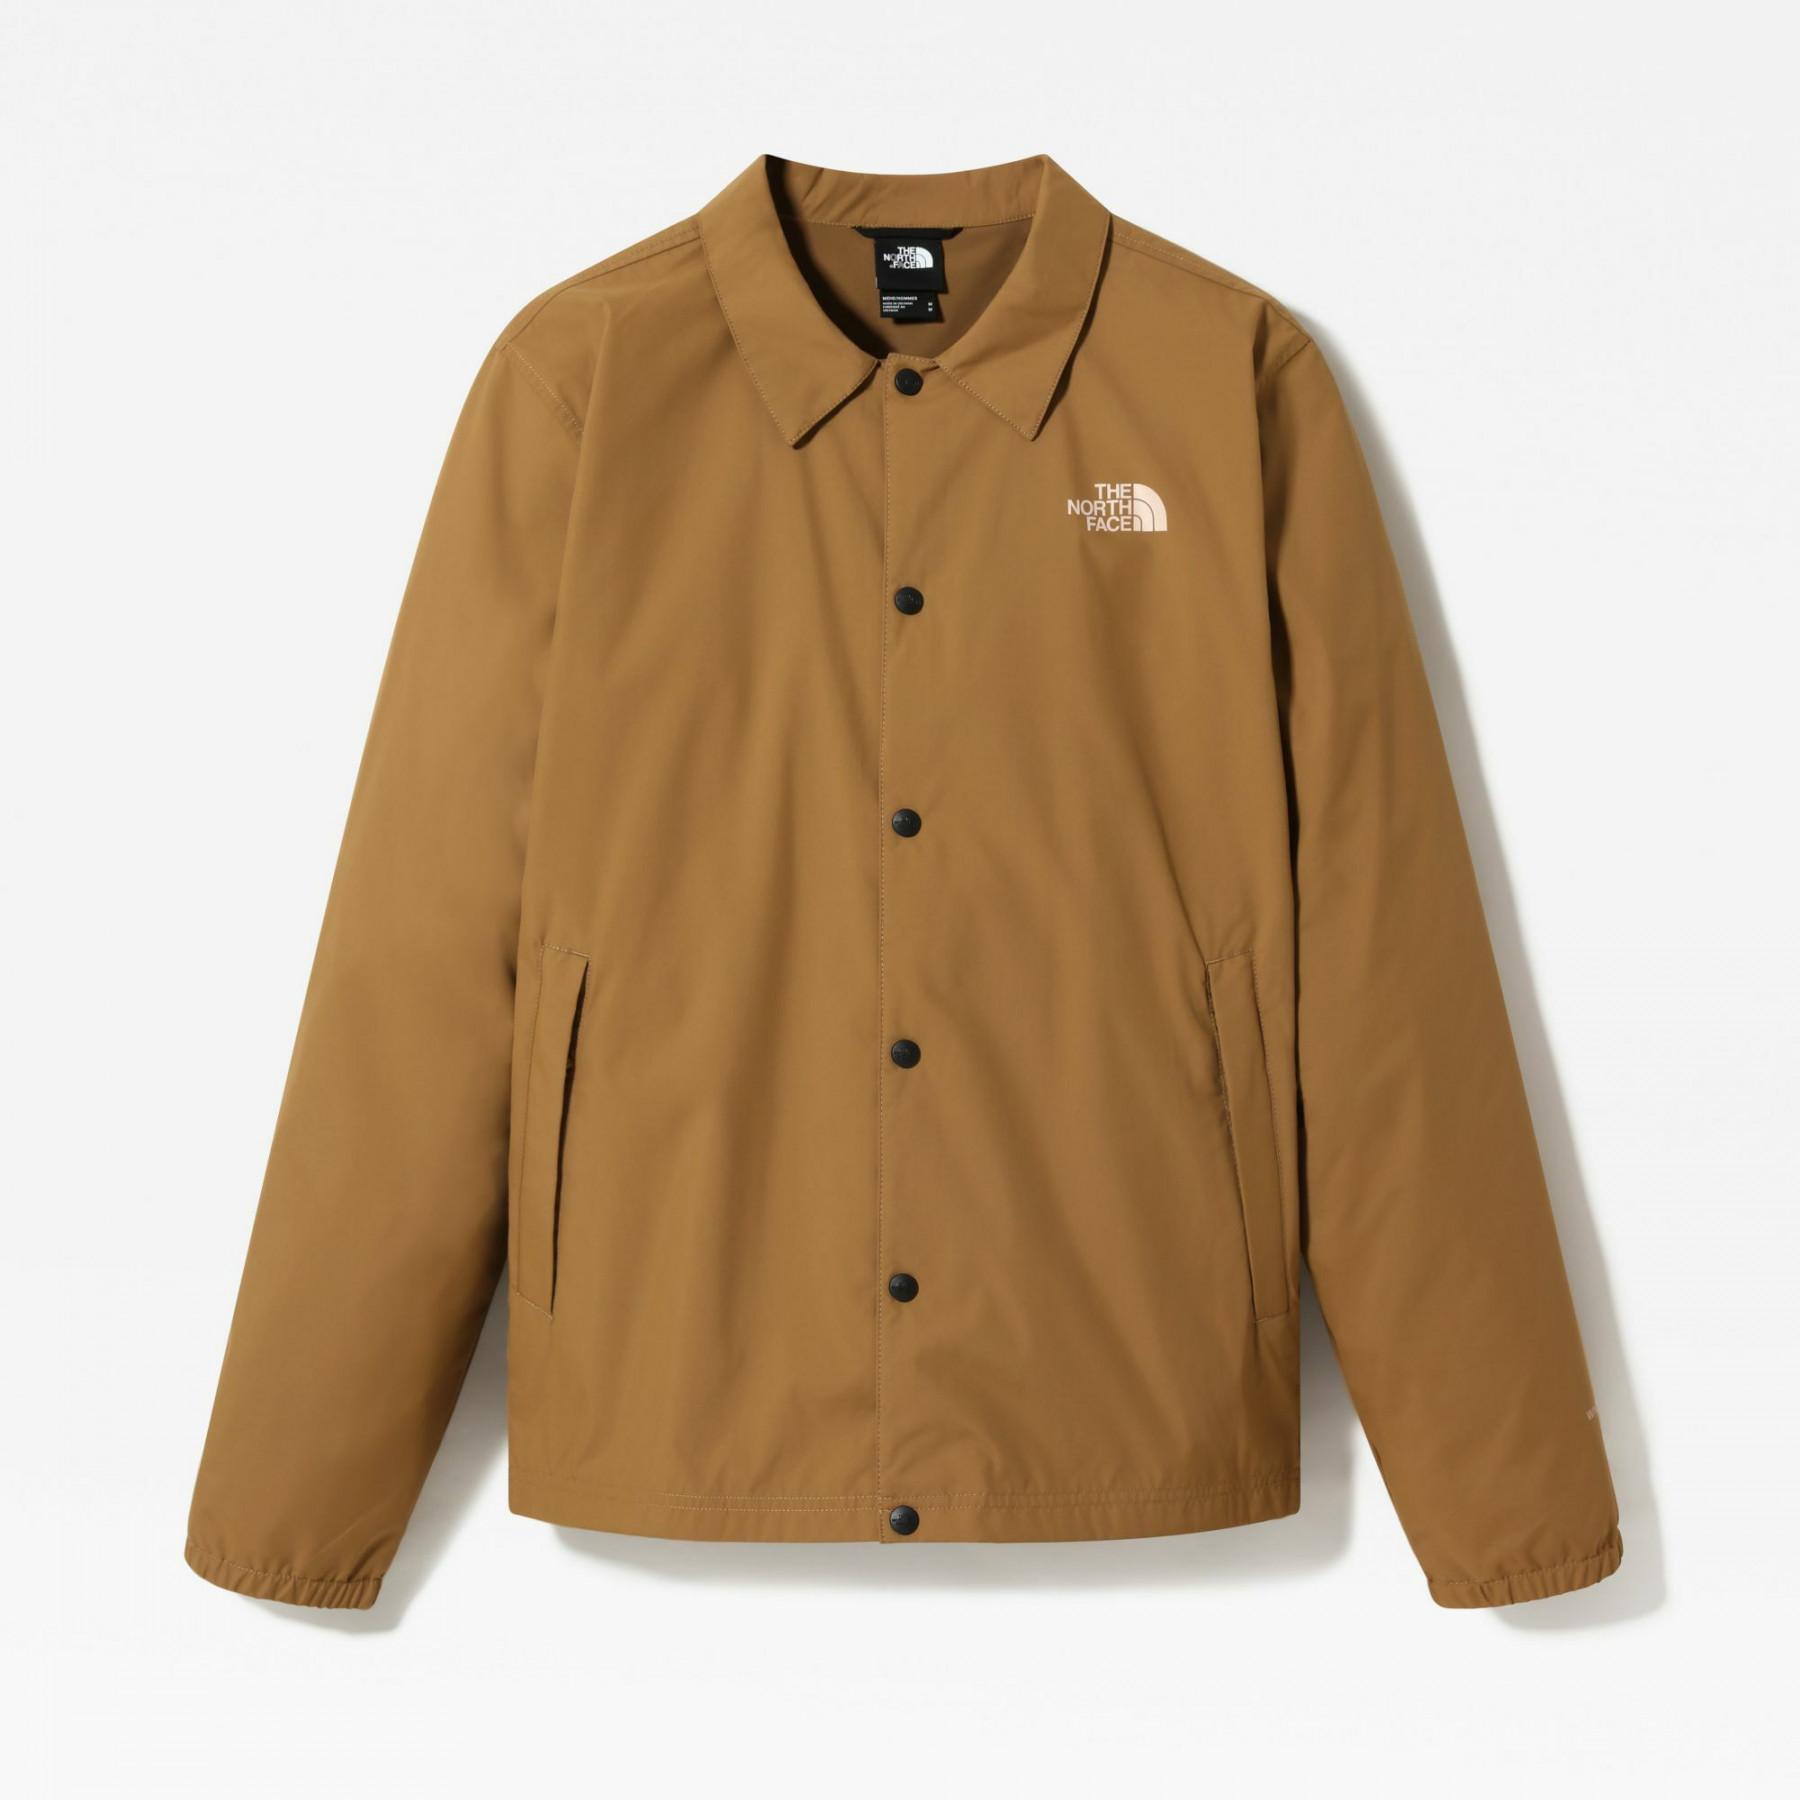 Giacca The North Face Standard fit